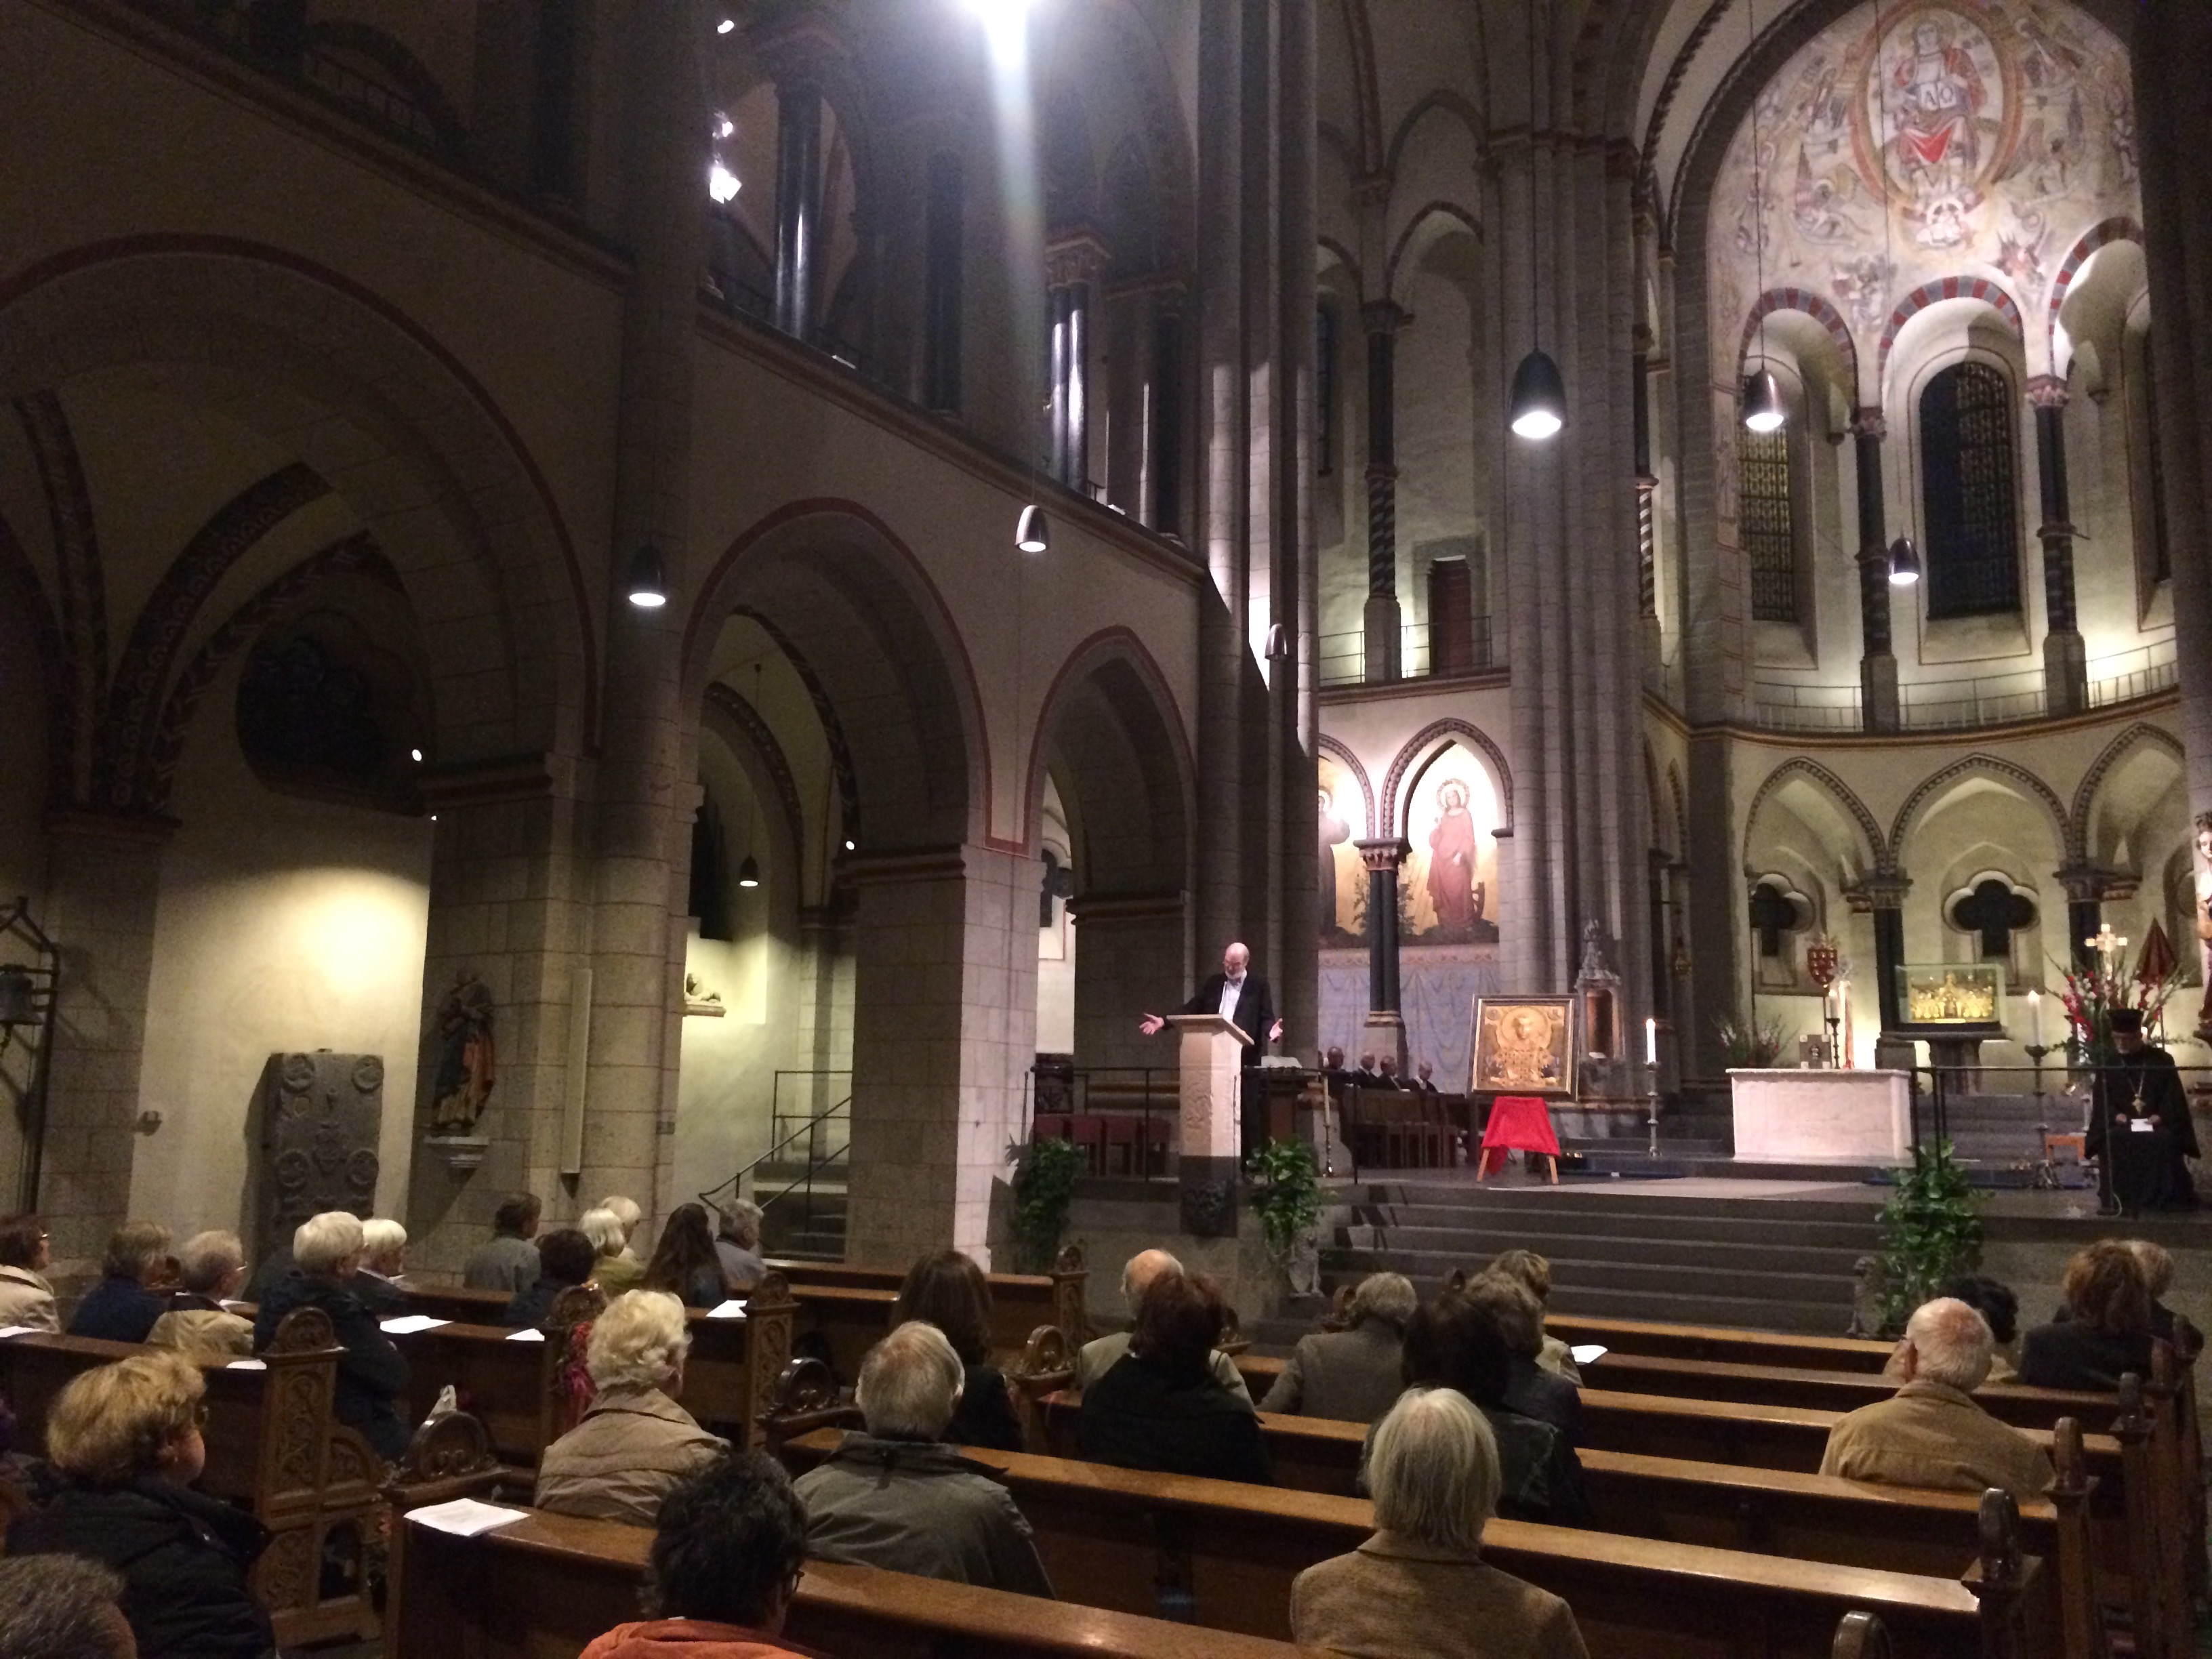 Schirrmacher calls for more Solidarity among Christians around the World in Address in Neuss “Cathedral”